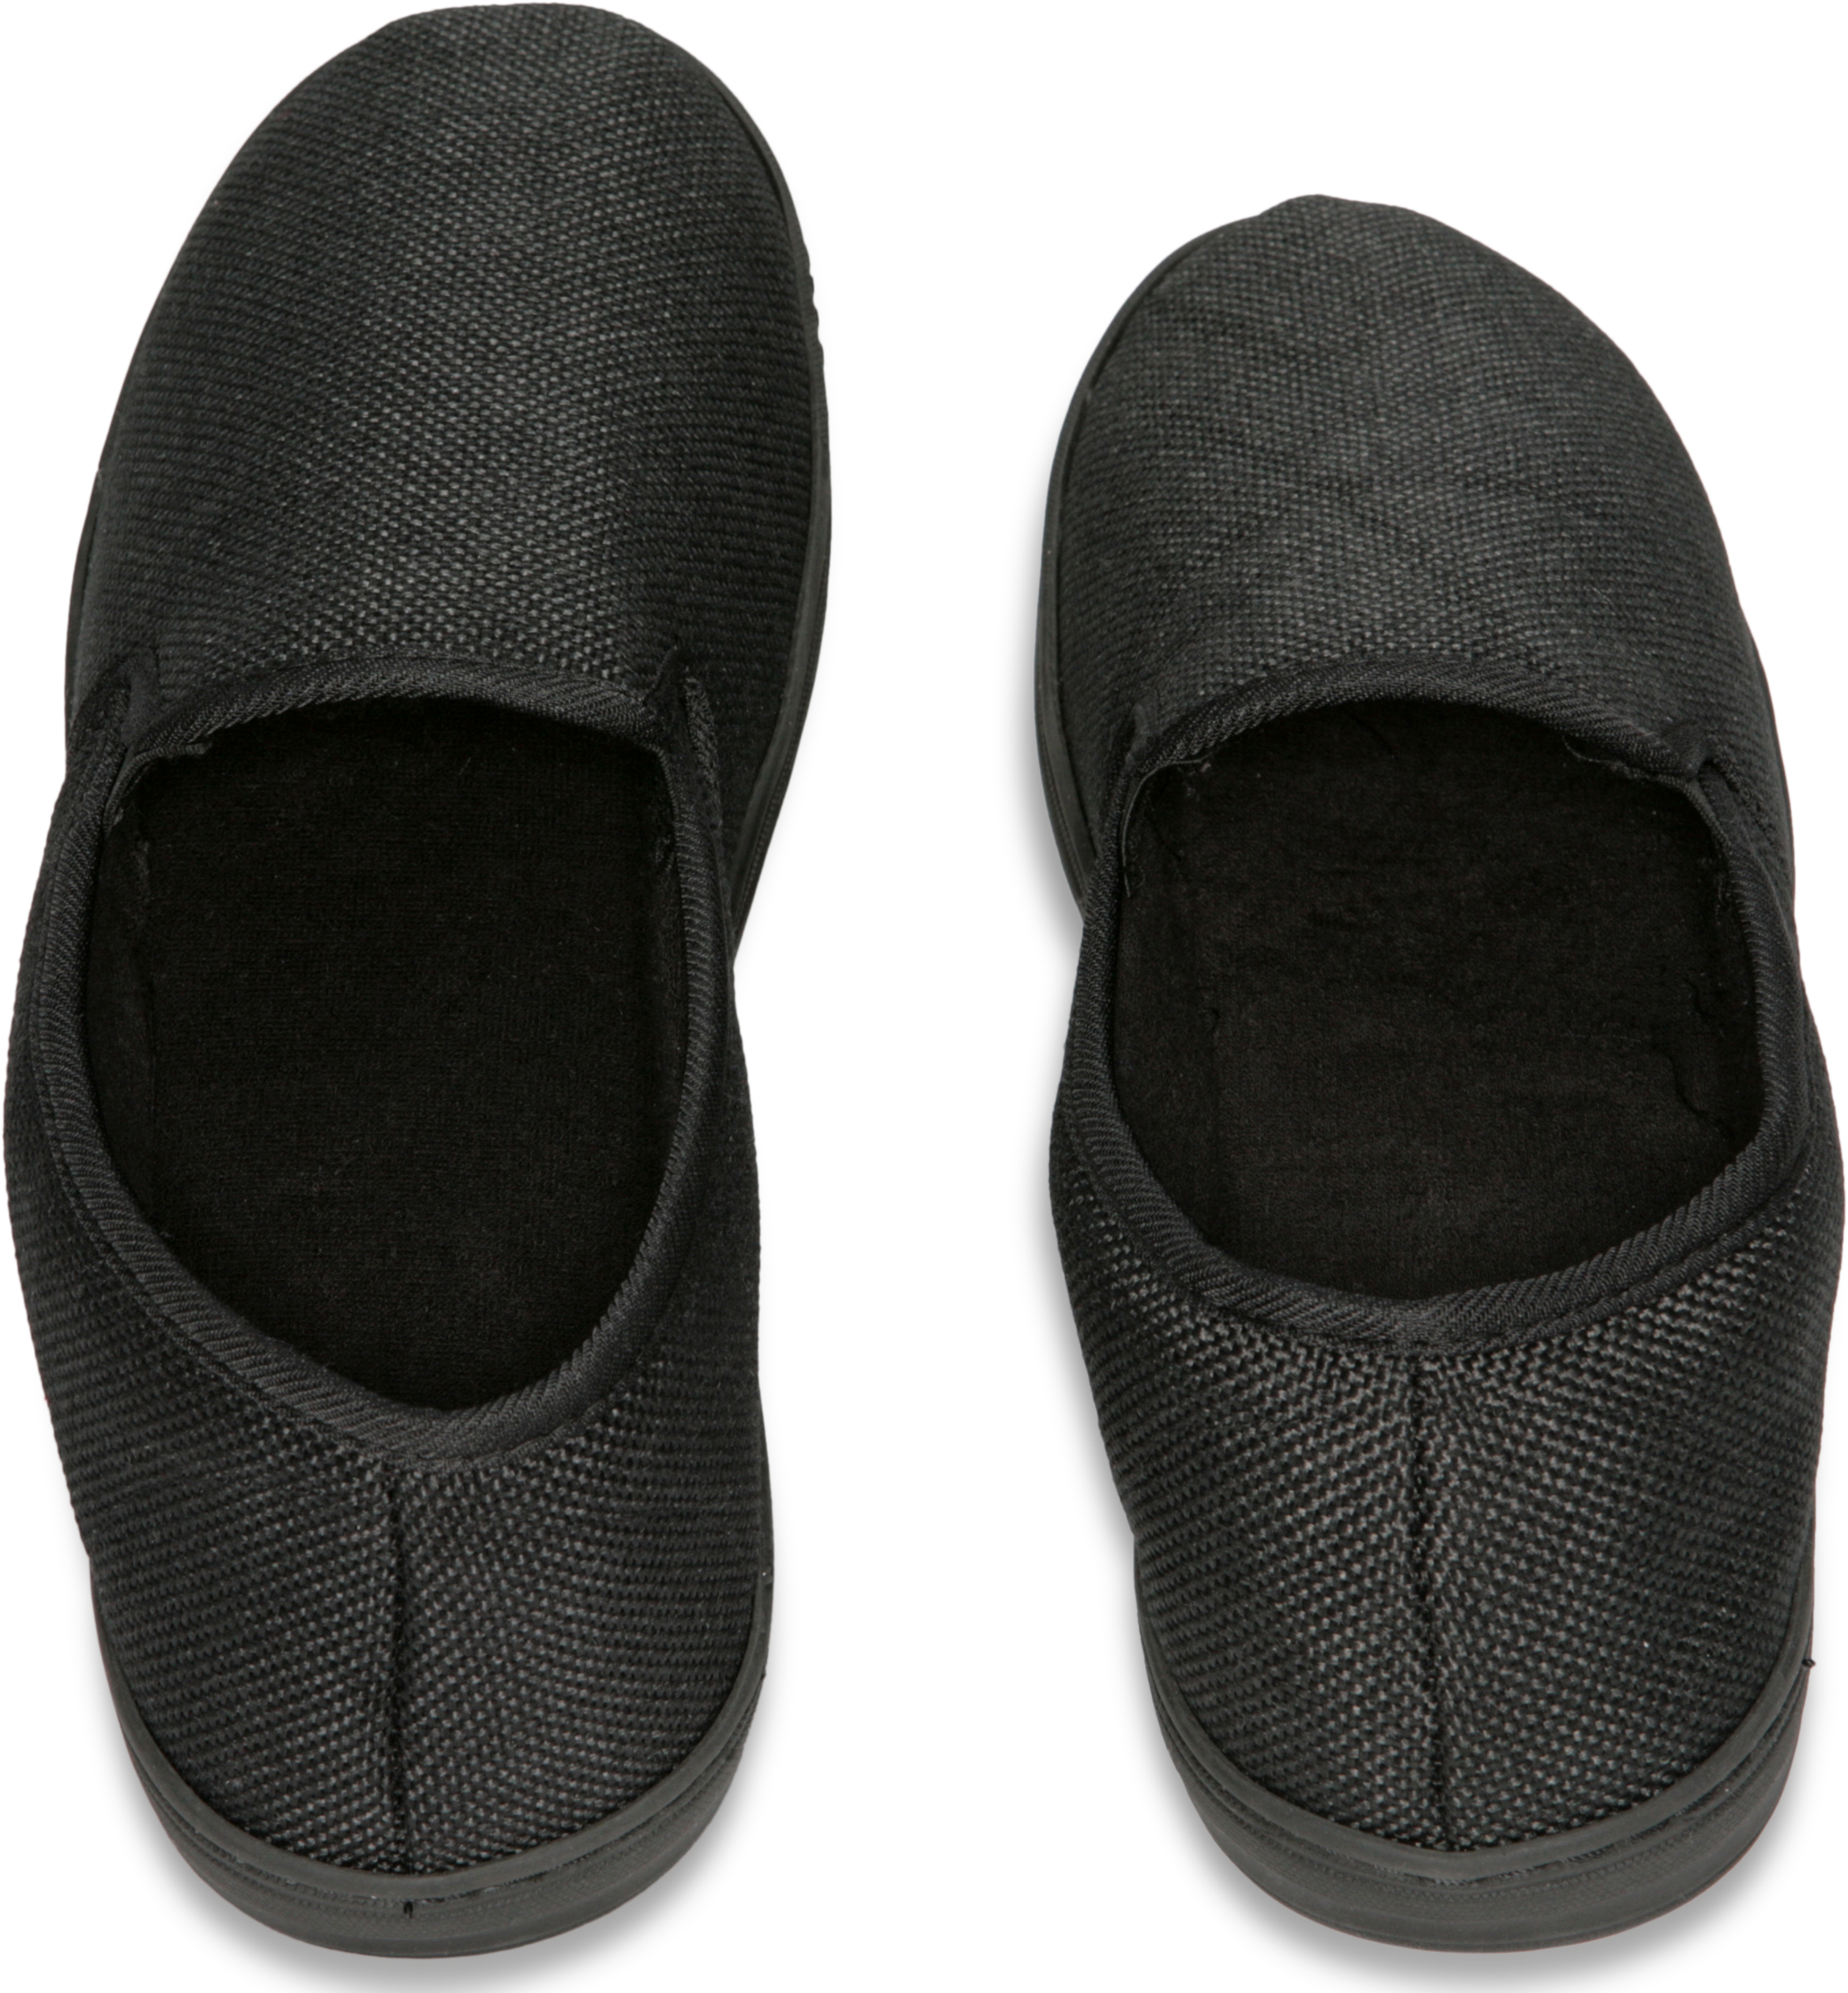 Deluxe Comfort Men's Memory Foam Slipper, Size 11-12 - Suede Vamp Checkered Lining - Memory Foam Insole - Strong TPR Outsole - Mens Slippers, Black - image 2 of 5